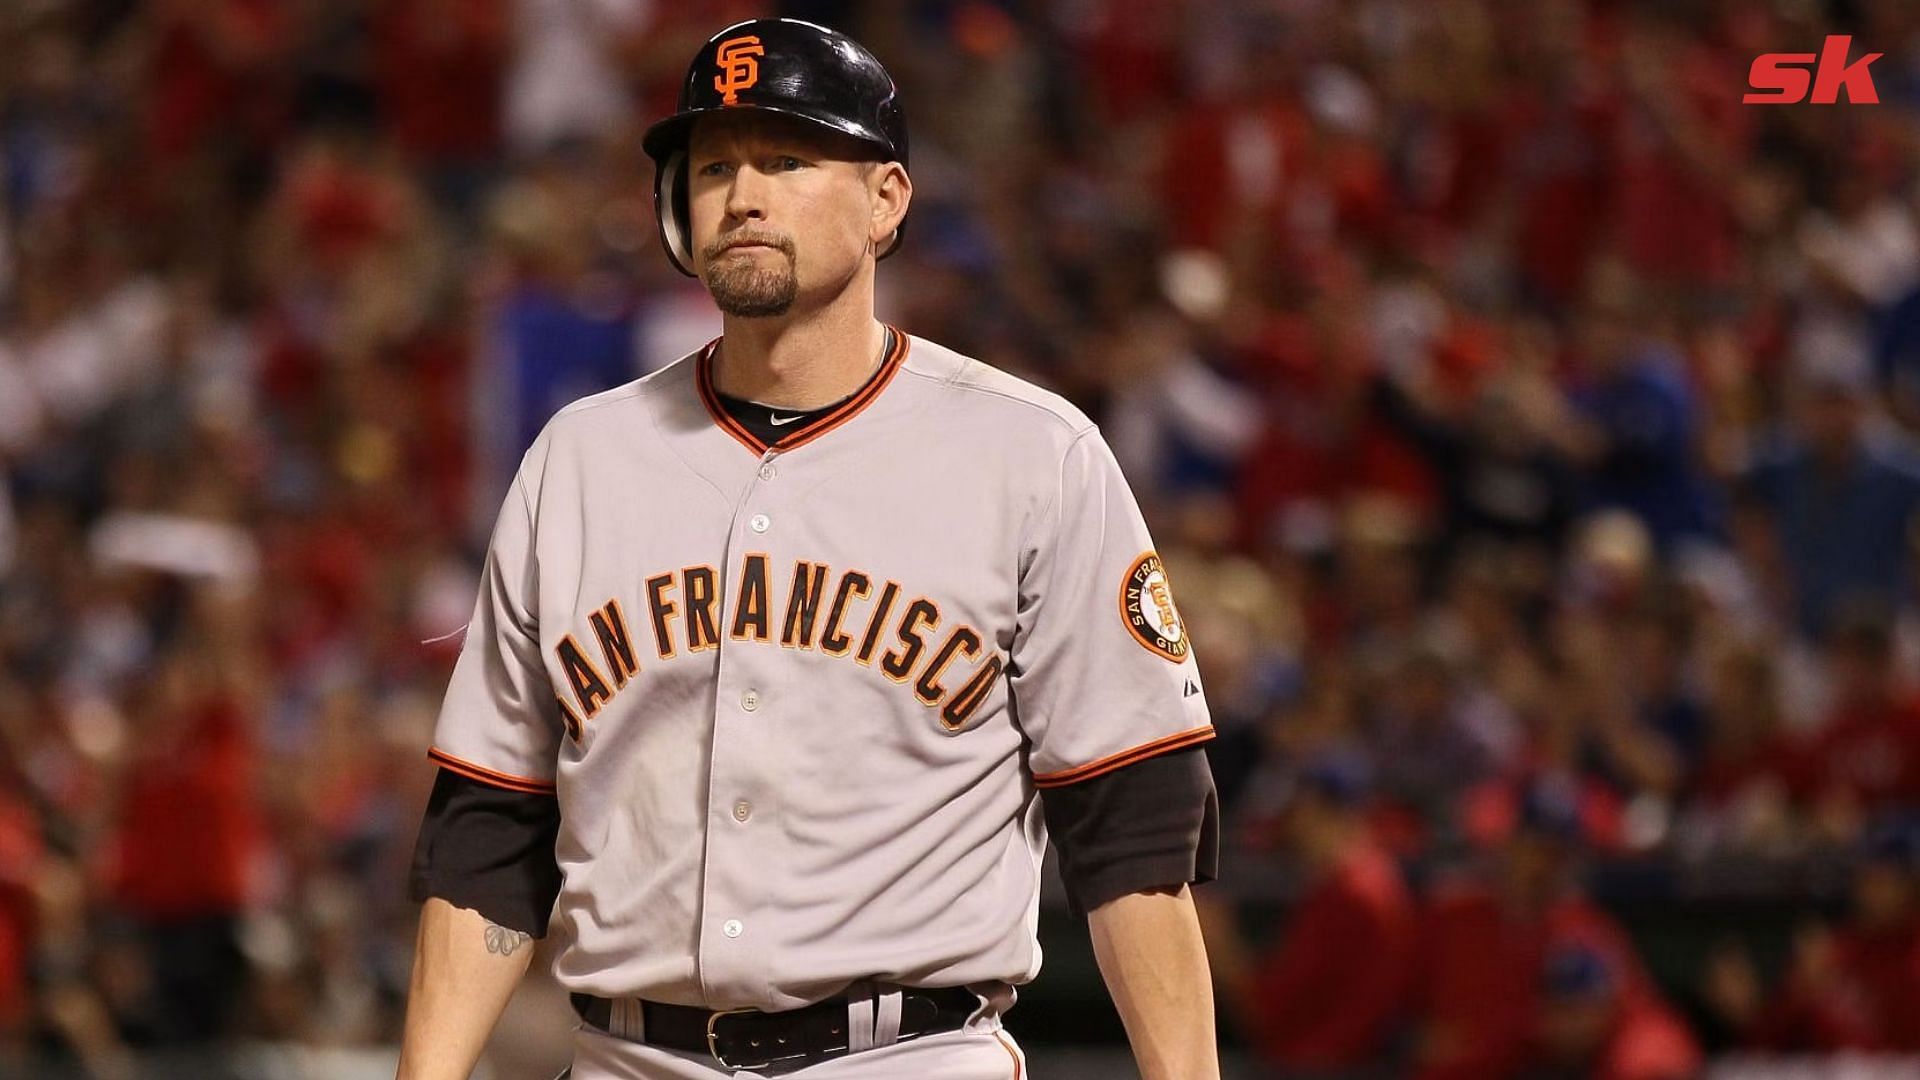 When ex-SF Giants player Aubrey Huff discussed his harrowing mental space during struggles with suicidal tendencies